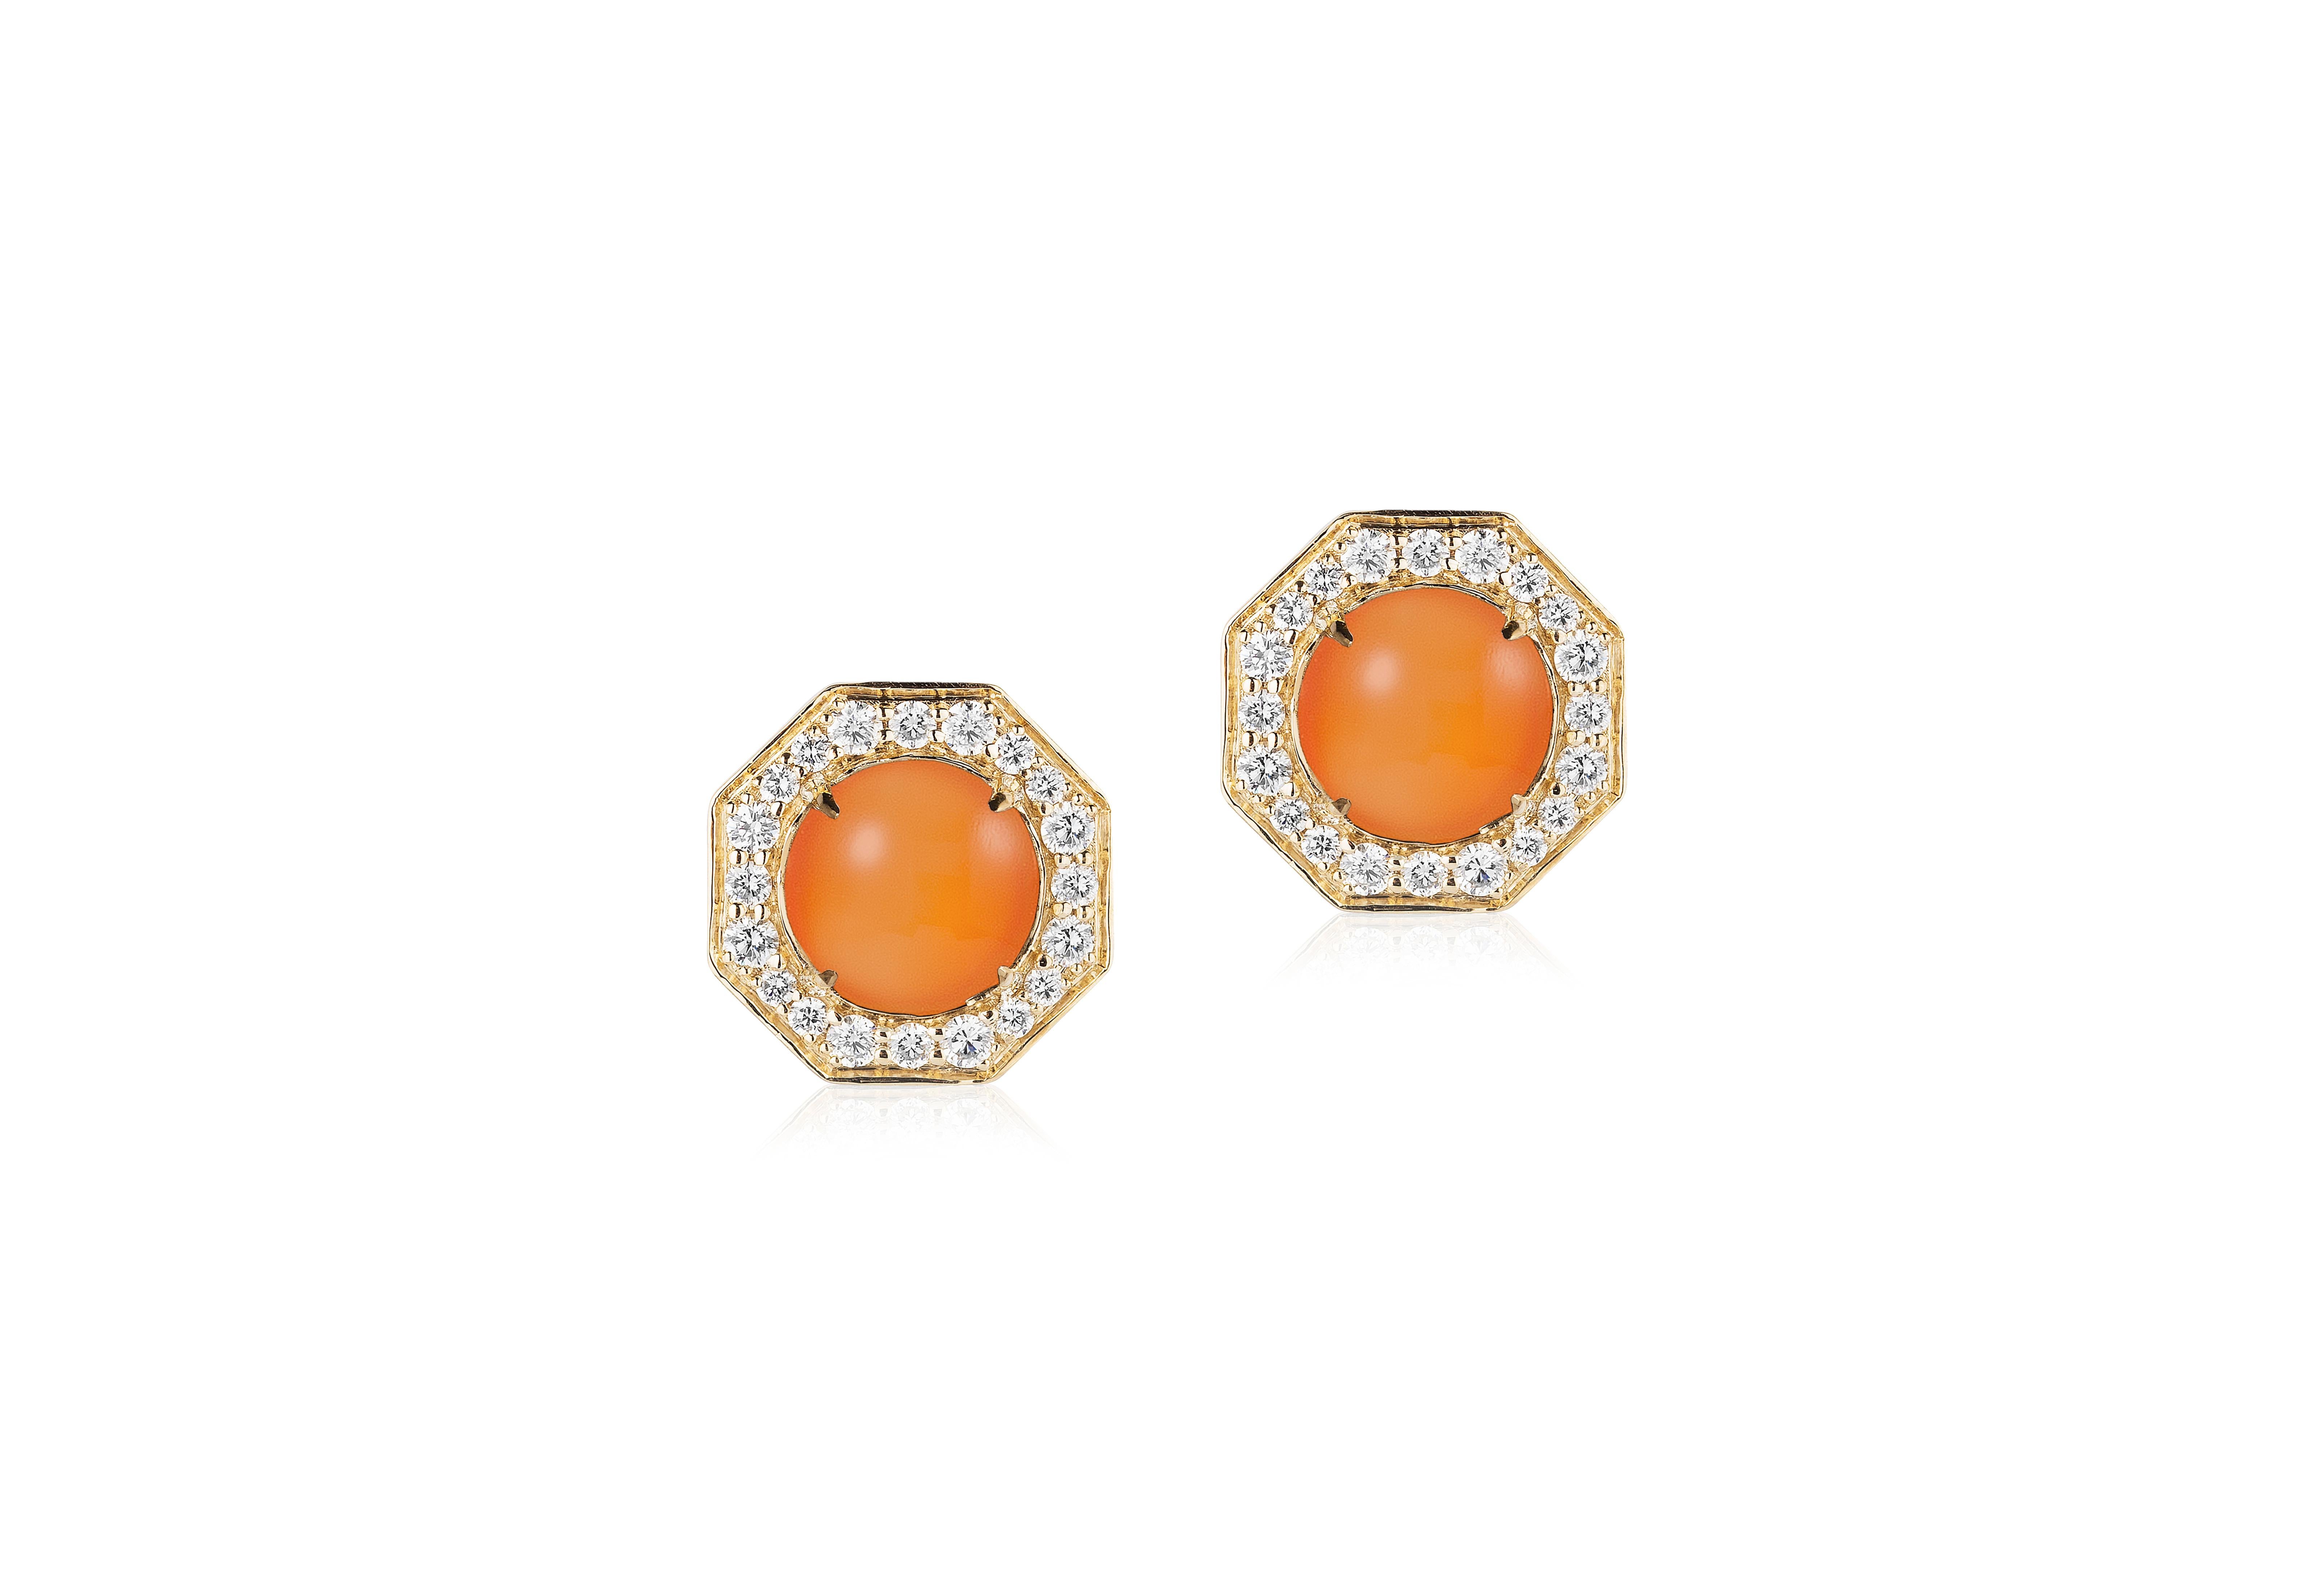 Orange Chalcedony Stud Earrings With Diamonds in 18K Yellow Gold, from 'Rock 'N Roll' Collection.

Stone Size: 8 mm 

Approx. Stone Wt: 4.52 Carats (Orange Chalcedony)

Diamonds: G-H / VS, Approx. Wt: 0.62 Carats